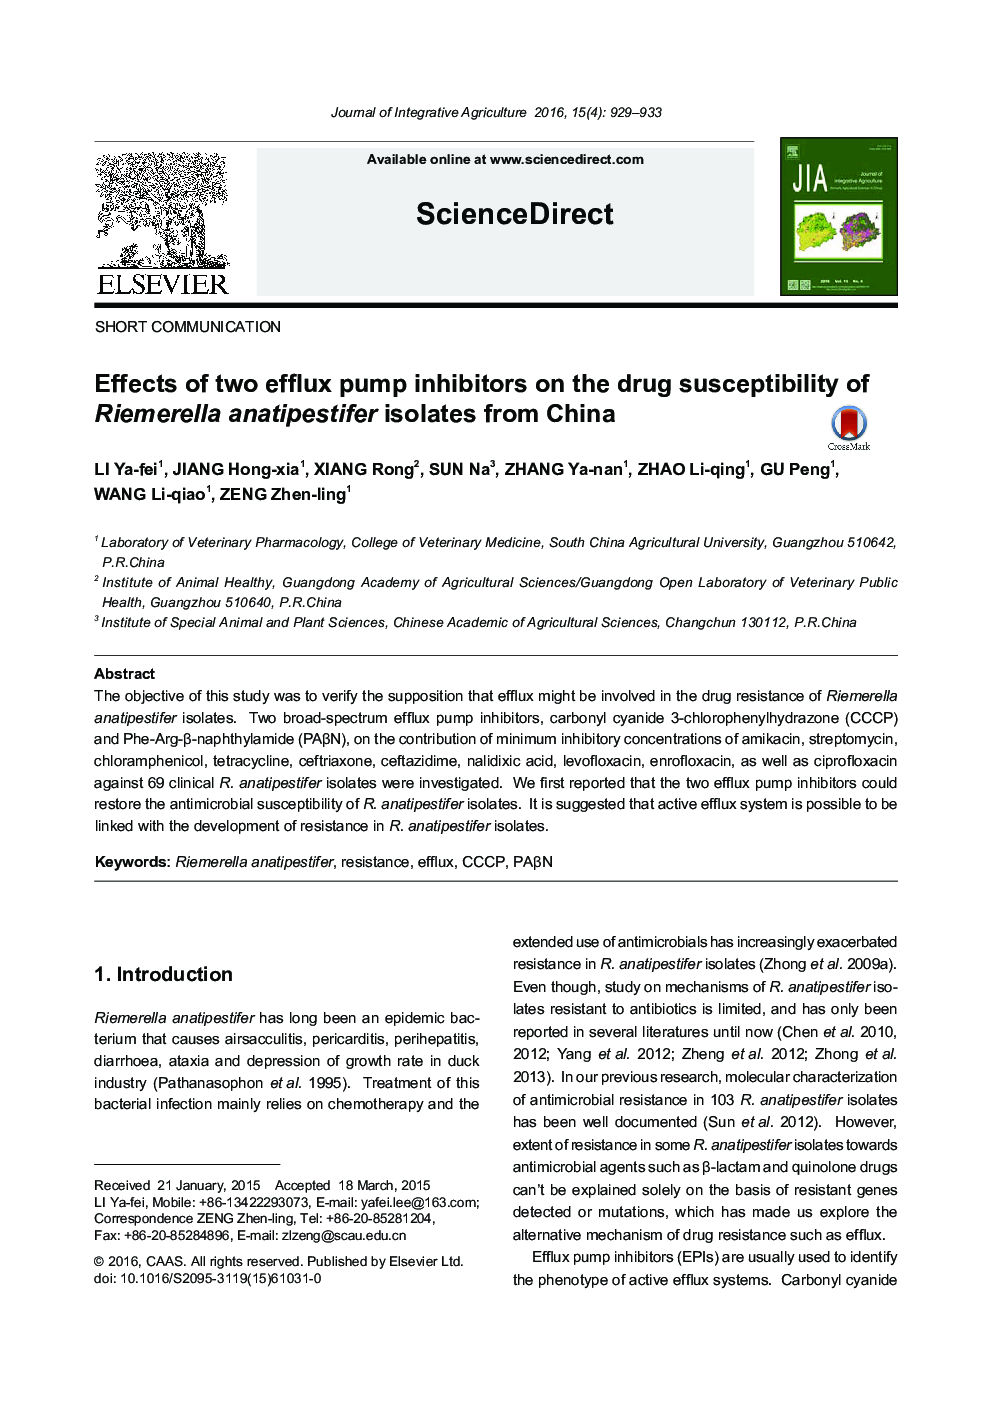 Effects of two efflux pump inhibitors on the drug susceptibility of Riemerella anatipestifer isolates from China